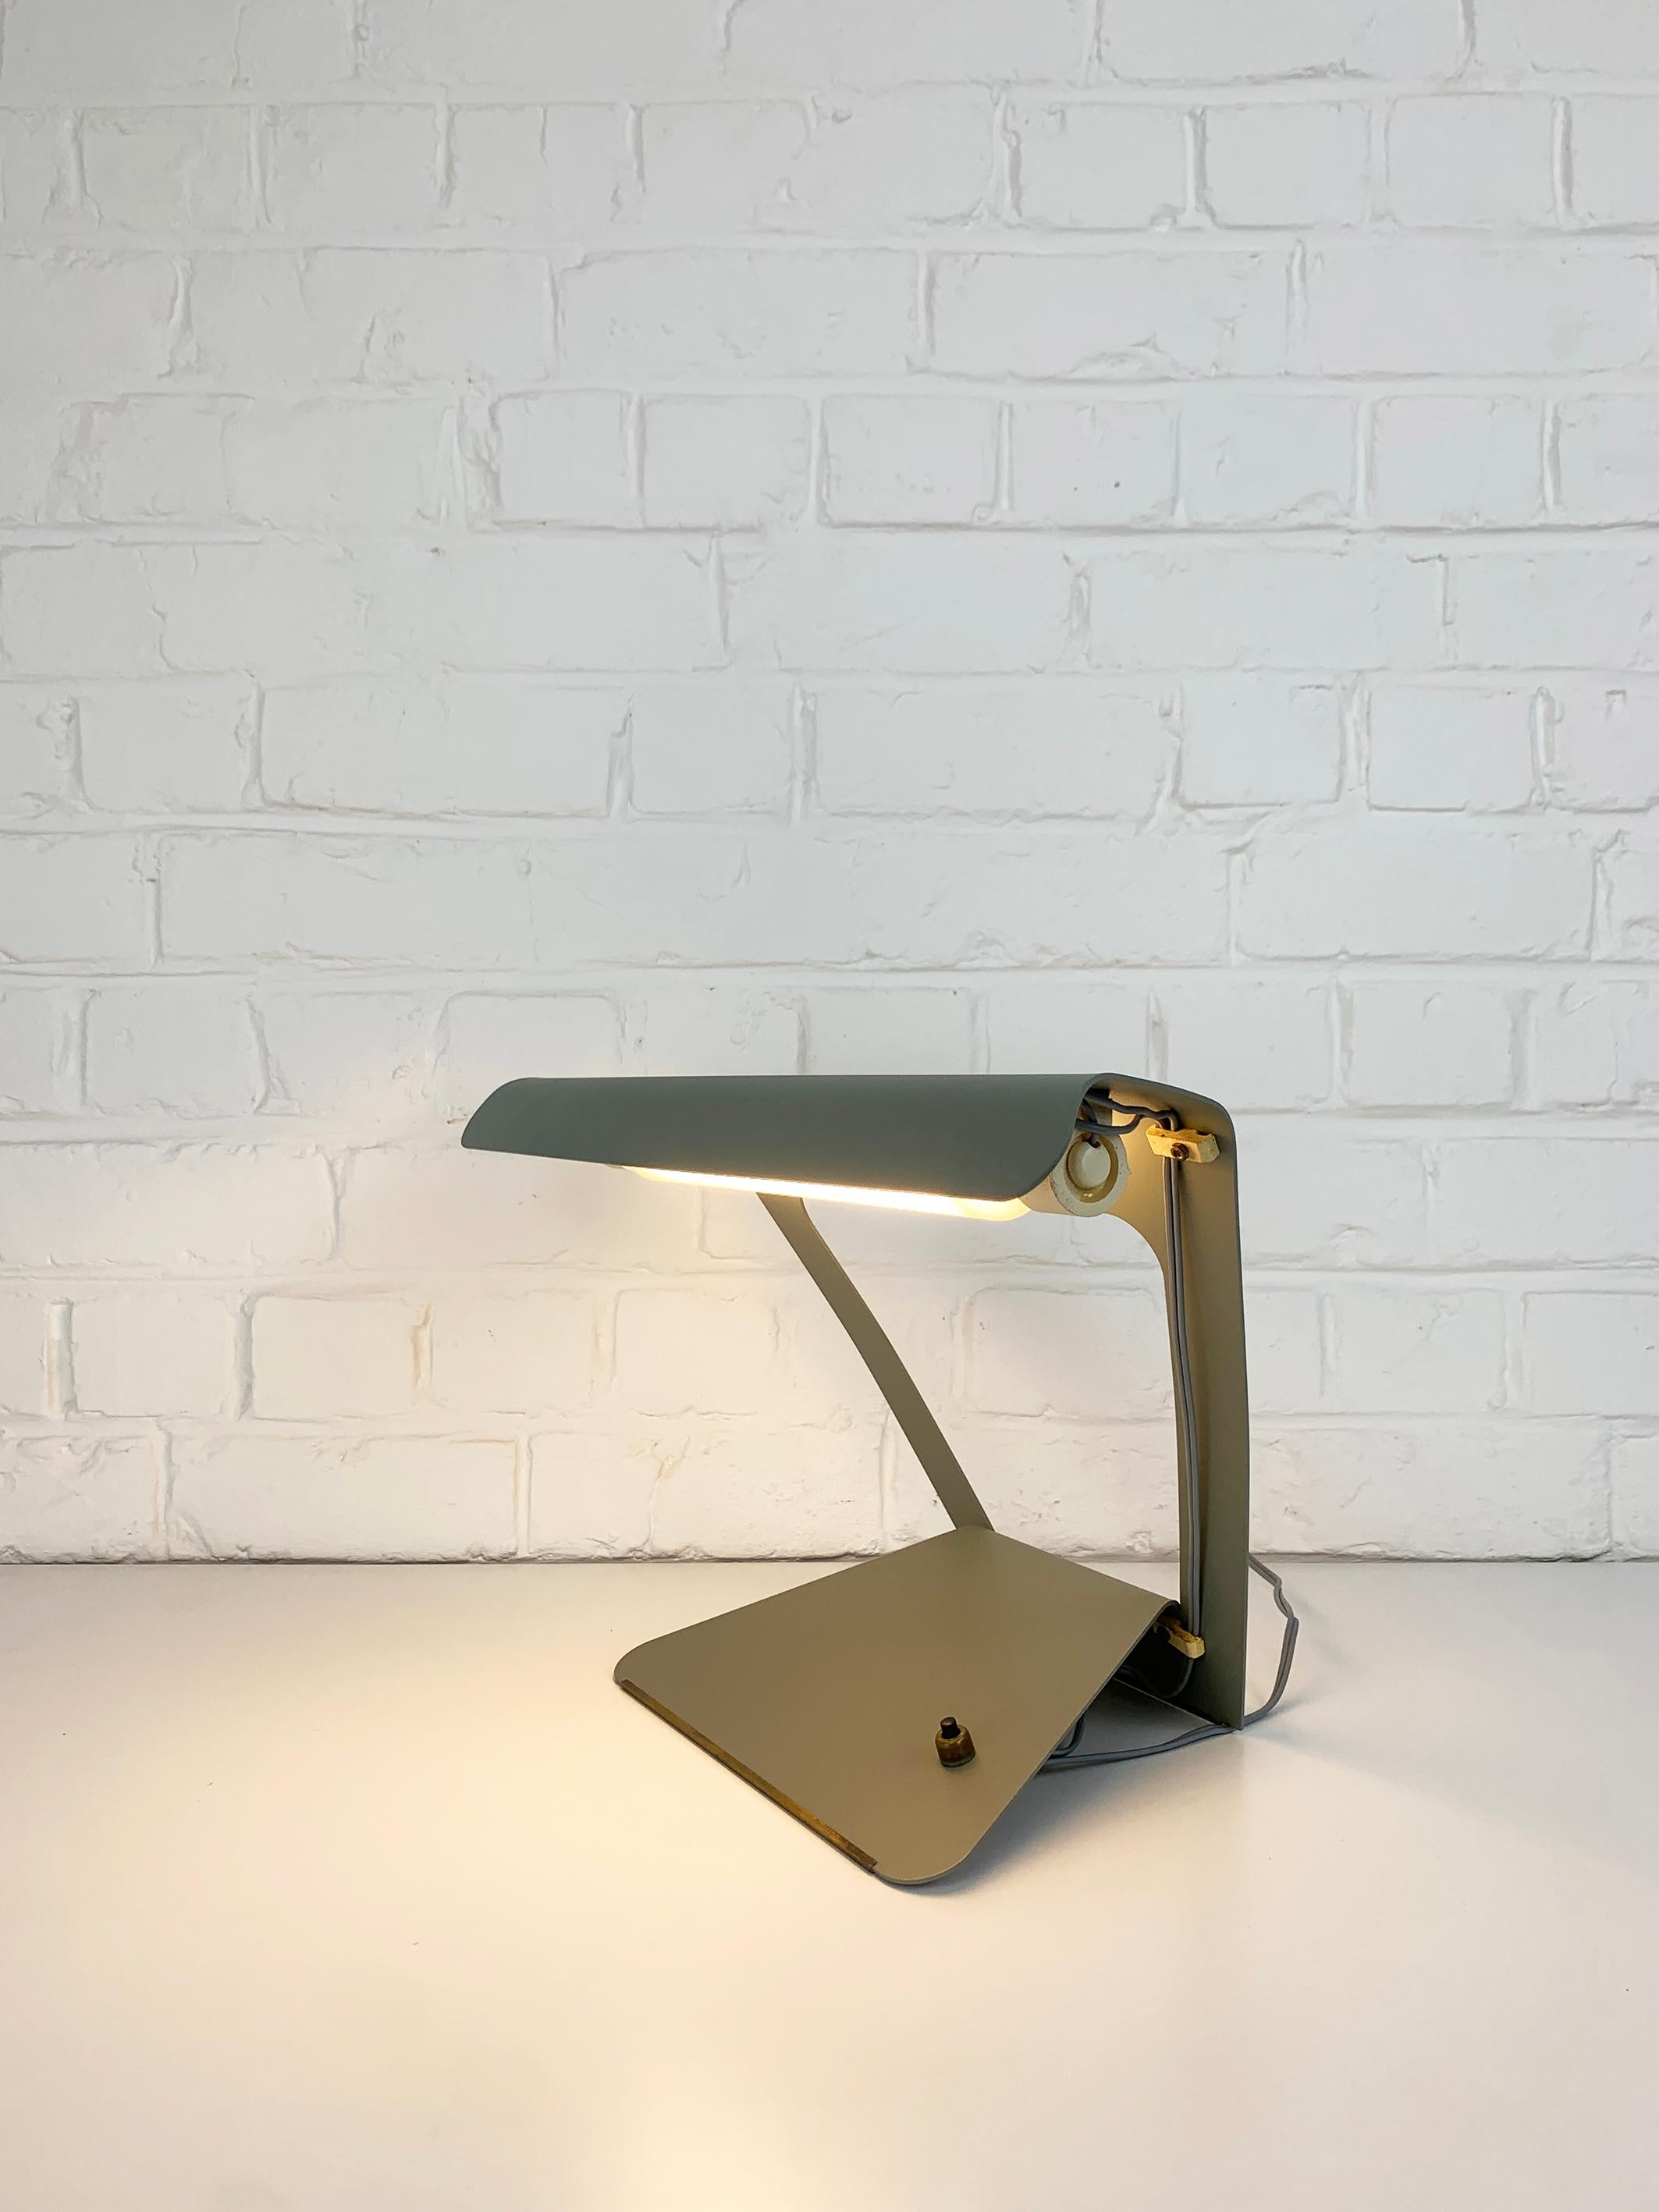 Metal Mid-Century Modernist Table or DeskLamp by Charlotte Perriand for Philips, 1950s For Sale